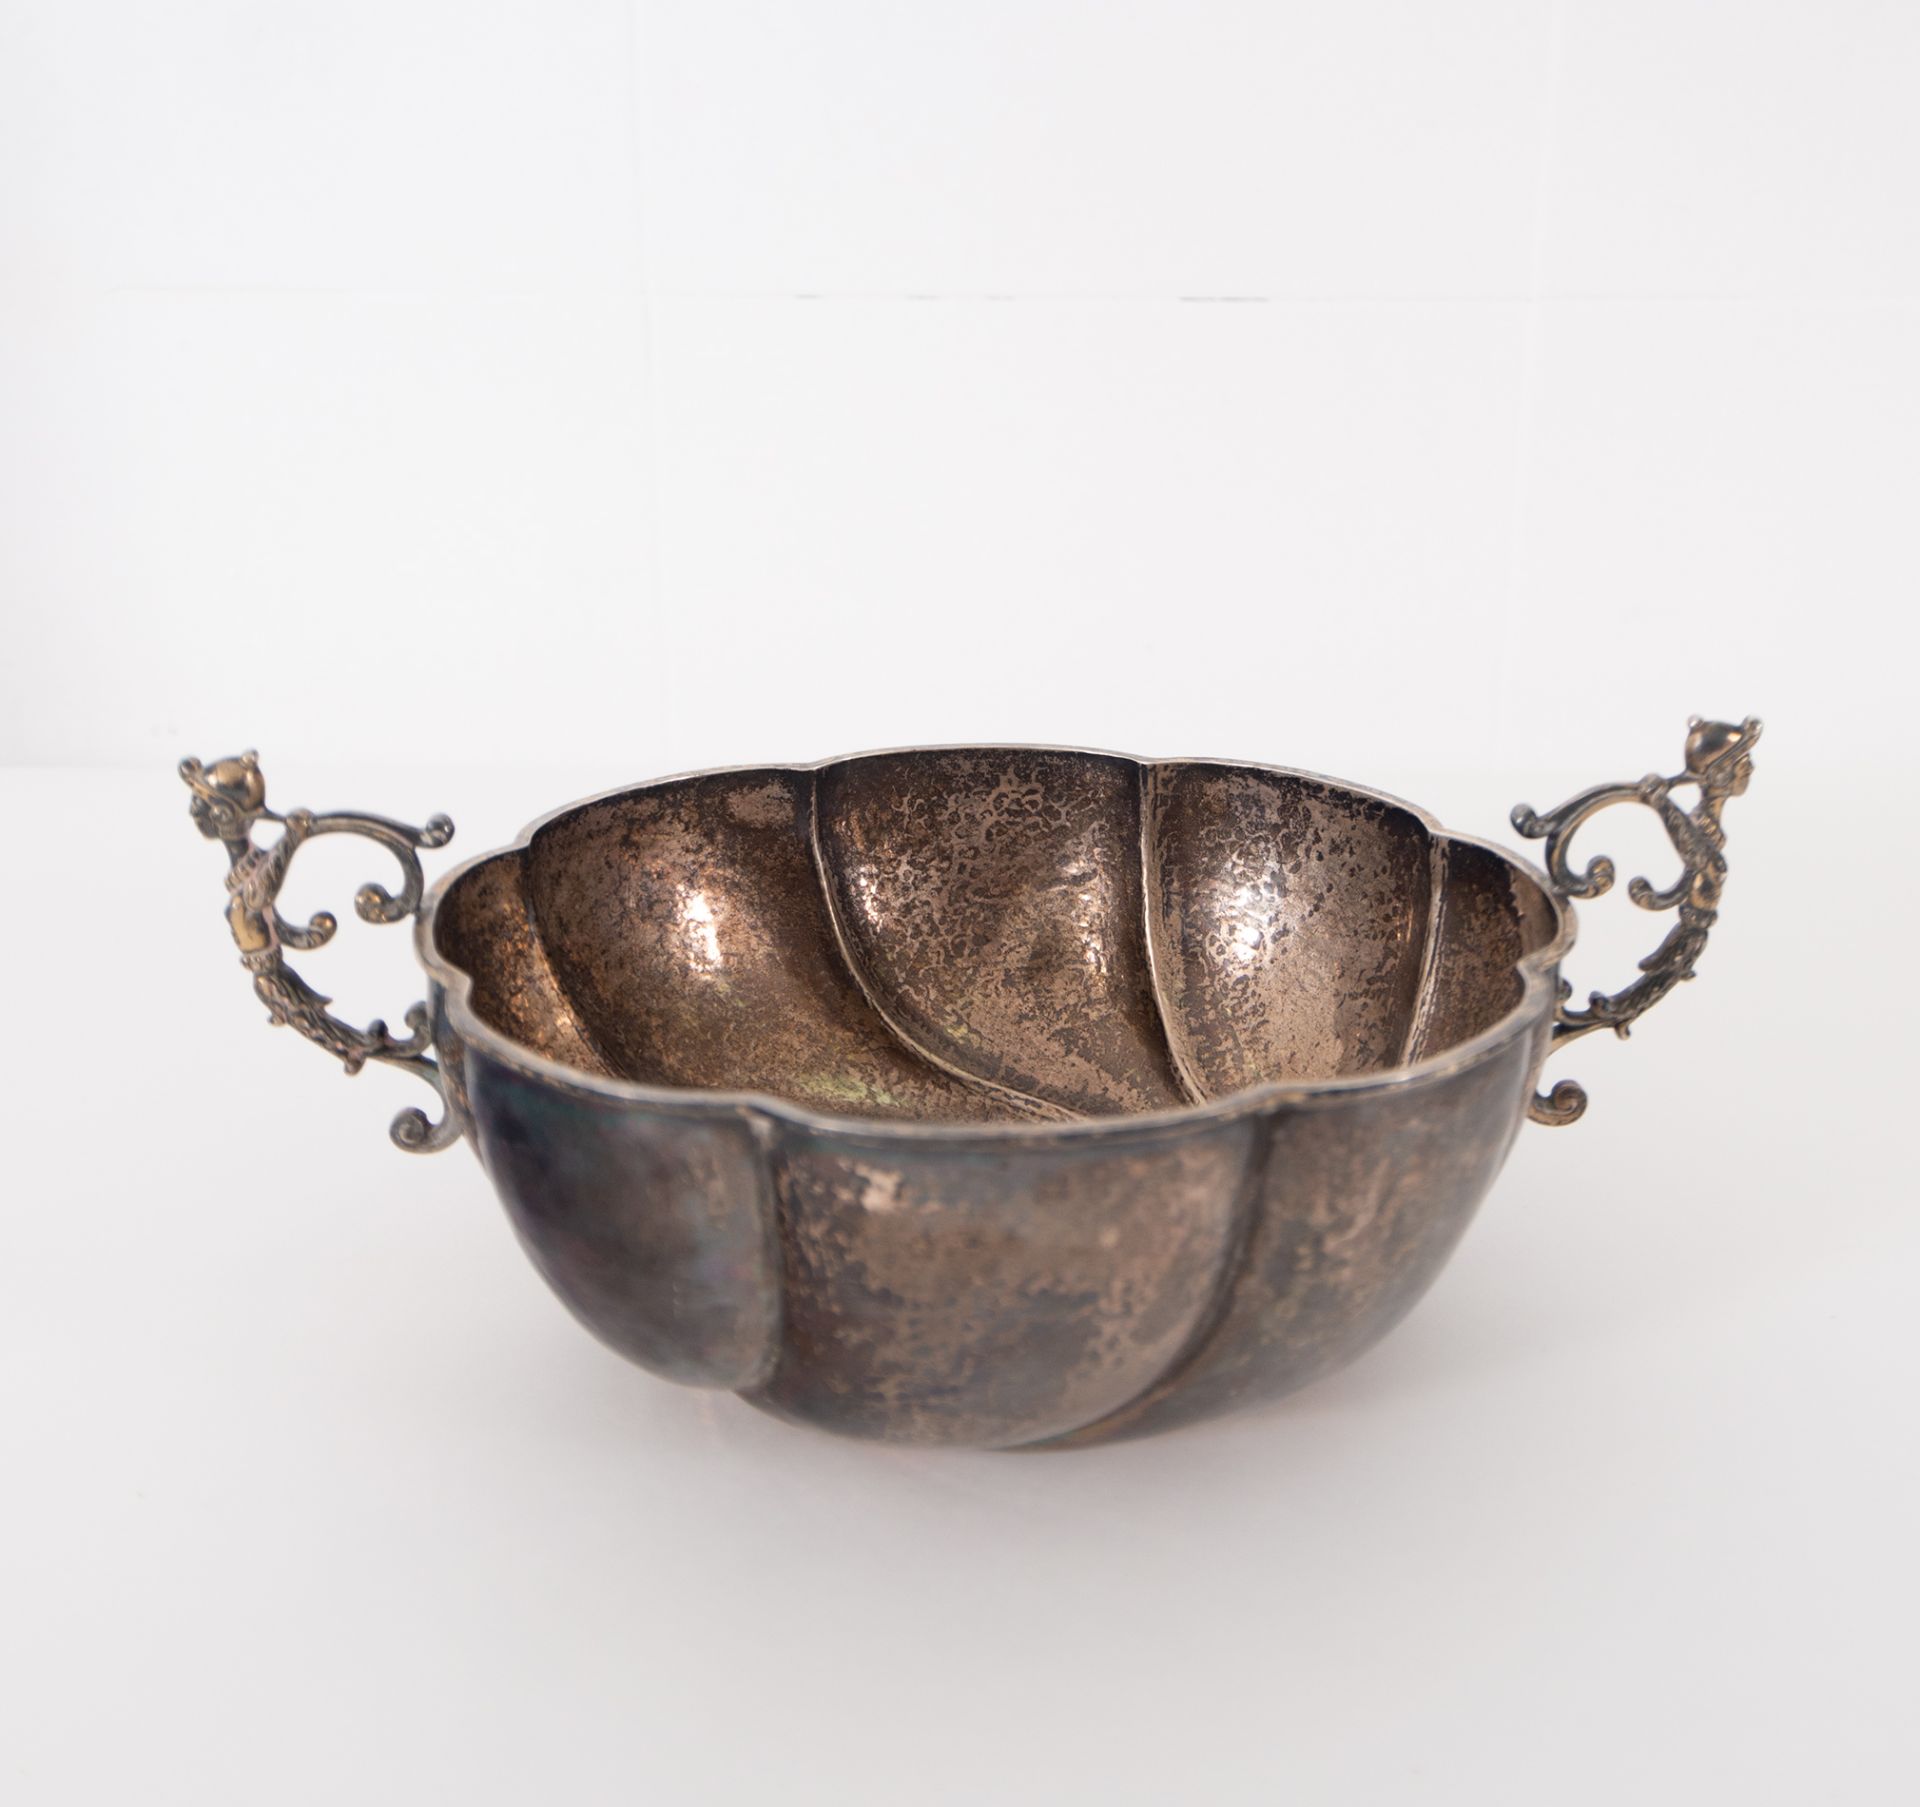 Wine tester in Silver embossed with the shell of Santiago, Spanish school of the 18th century